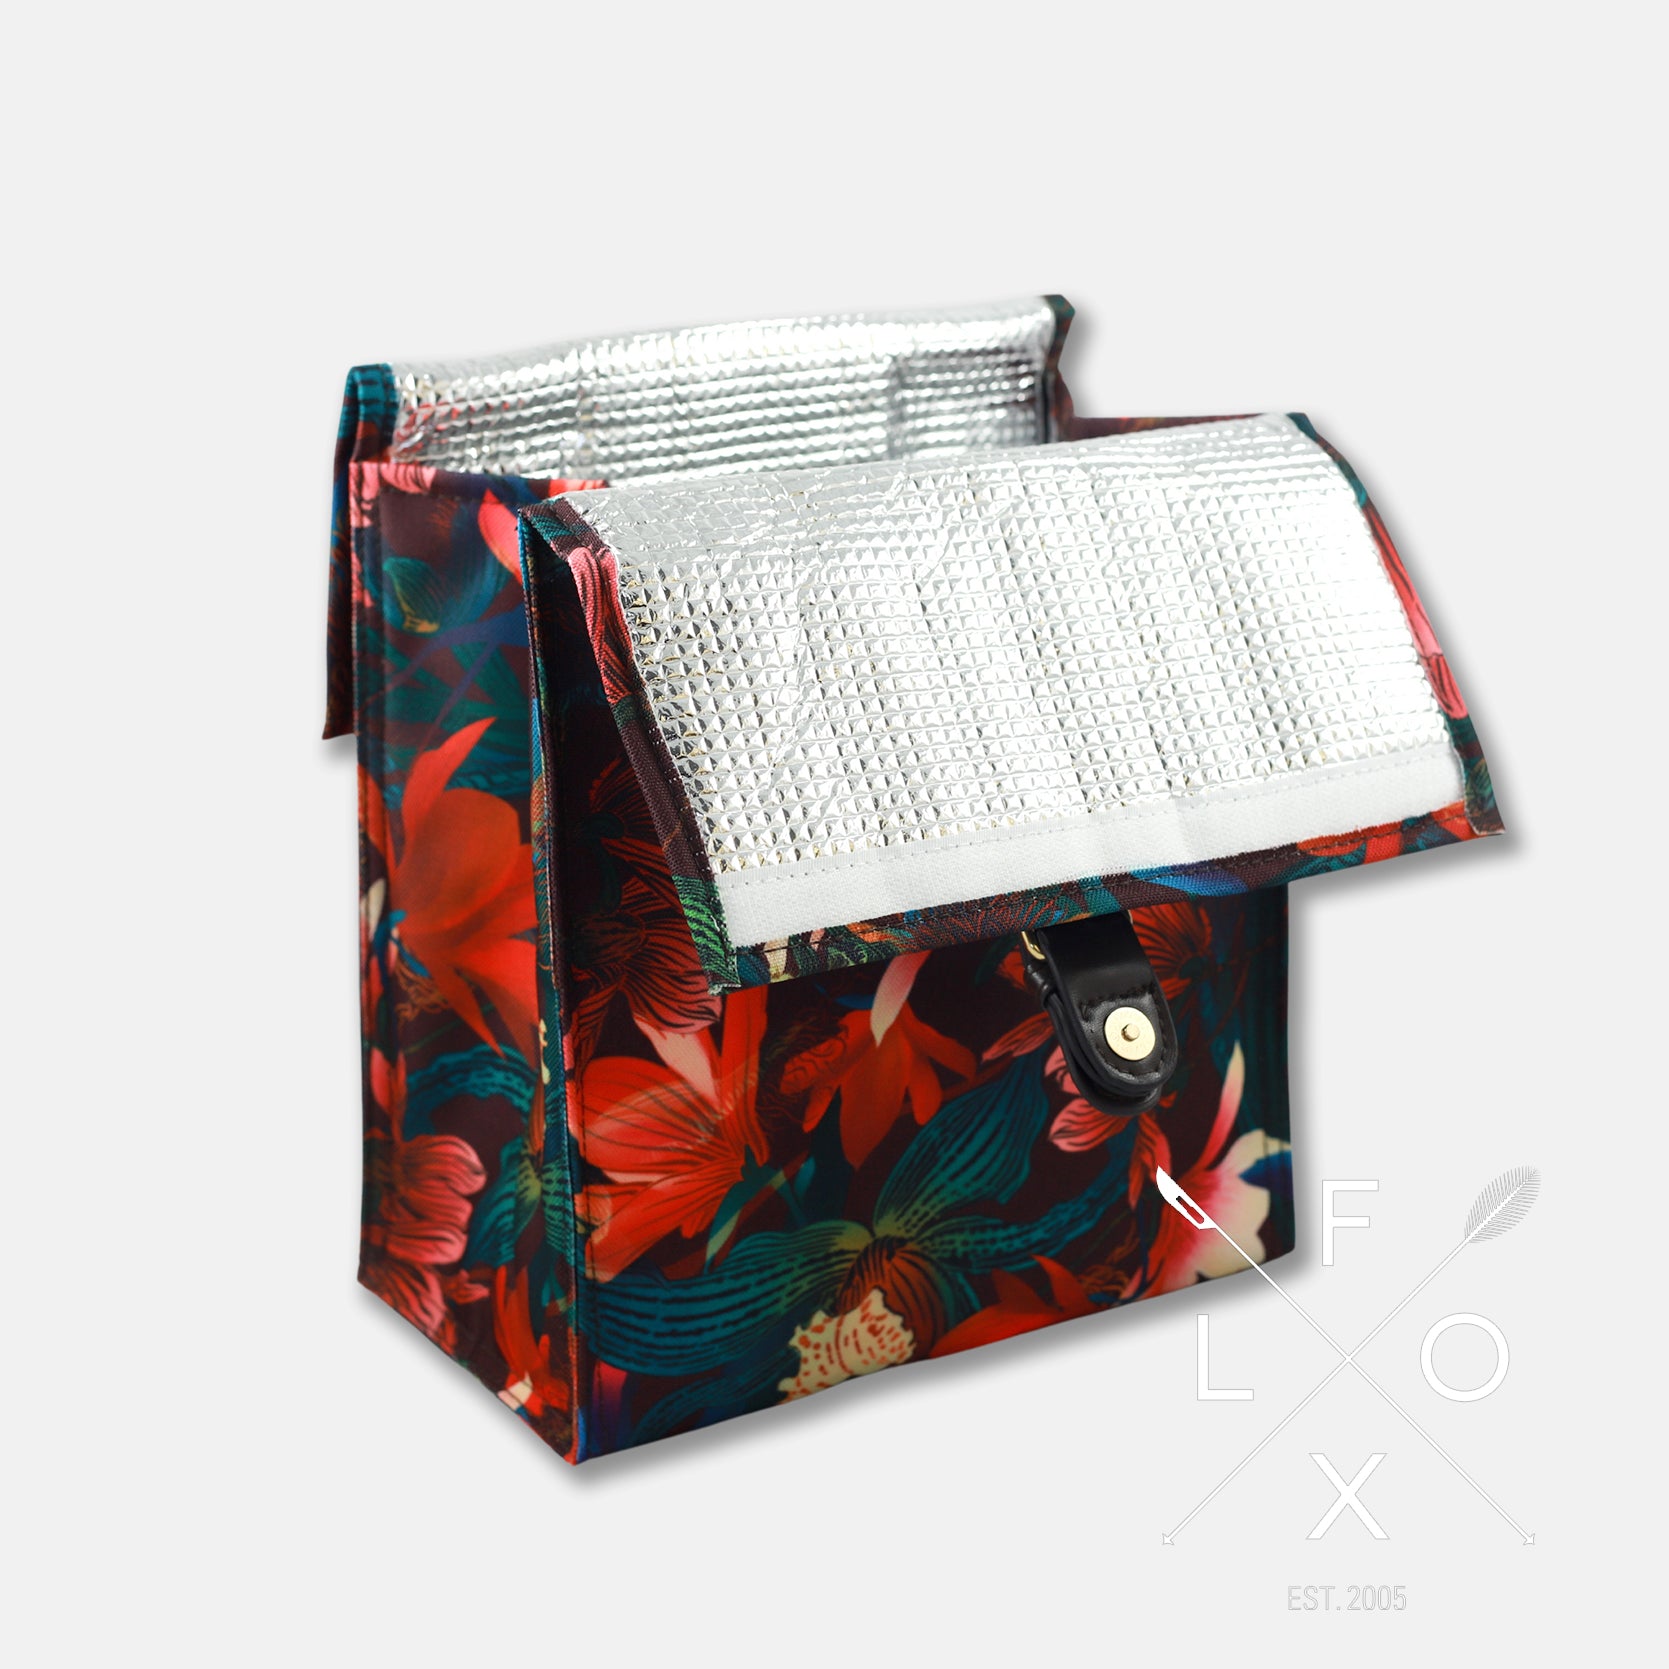 Colourful flox designed small lunch bag in dark burgundy with bright magnolia flower print and silver thermal lining.